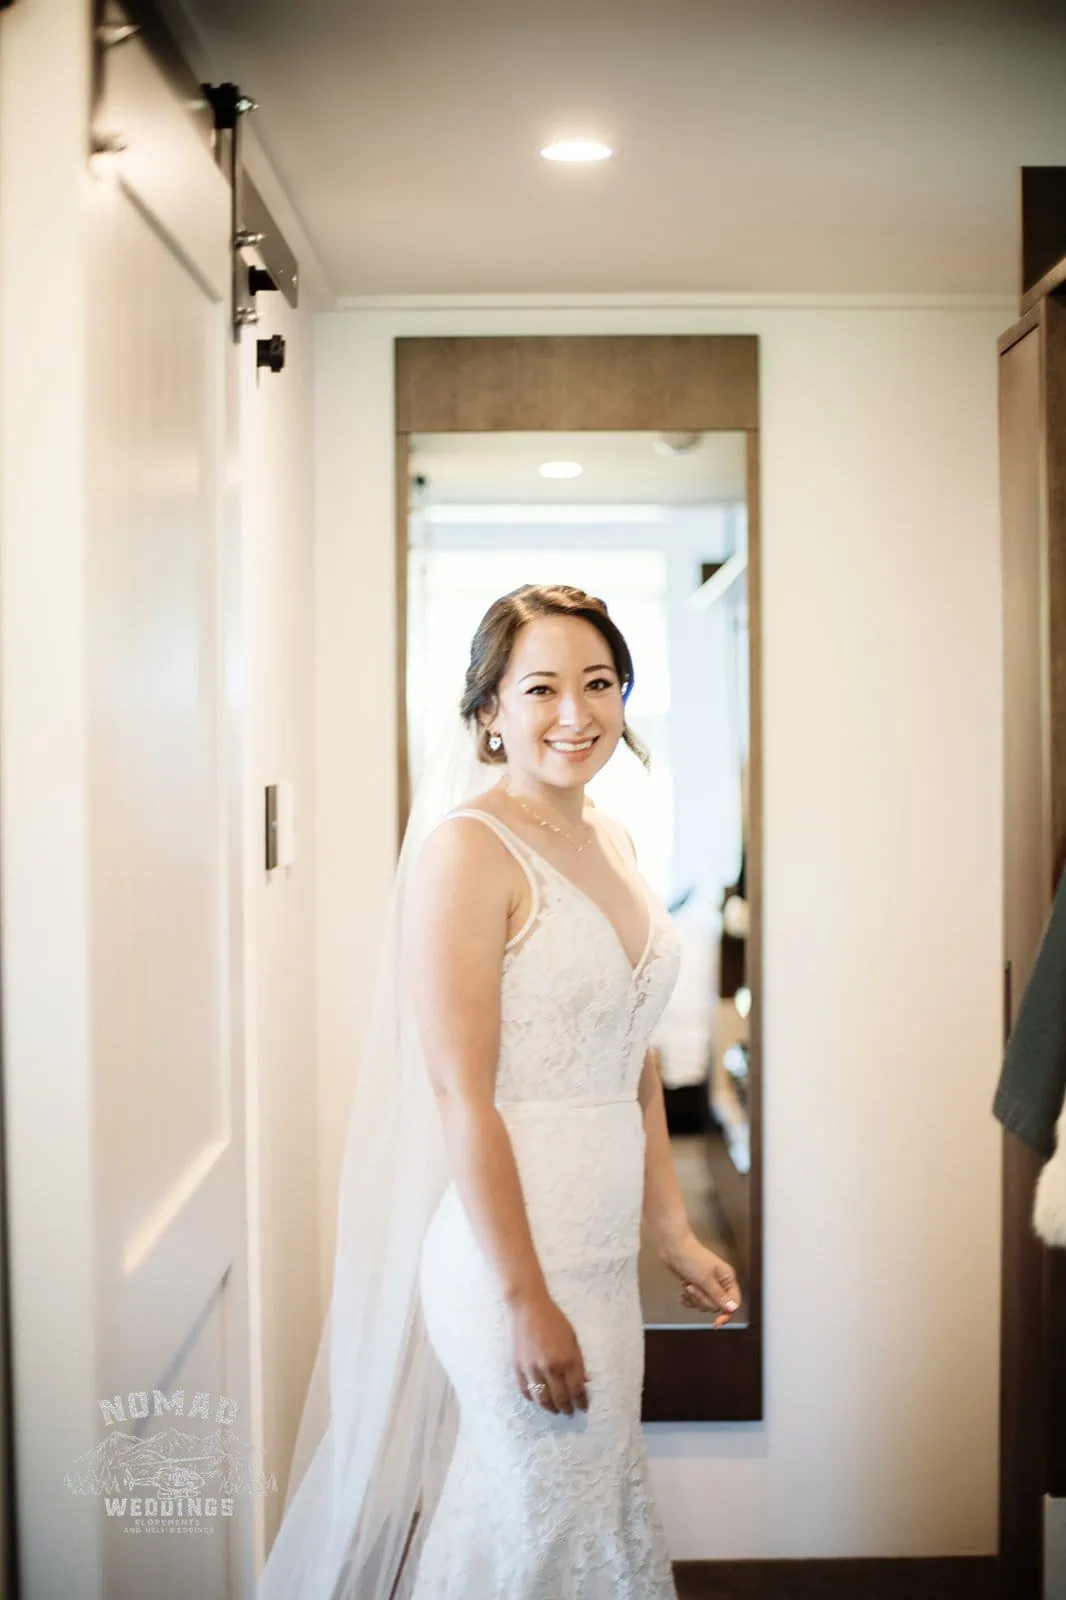 Amy & Eden's enchanting wedding ceremony takes place at Lake Erskine with the bride in her beautiful wedding dress, captured in front of a mirror.